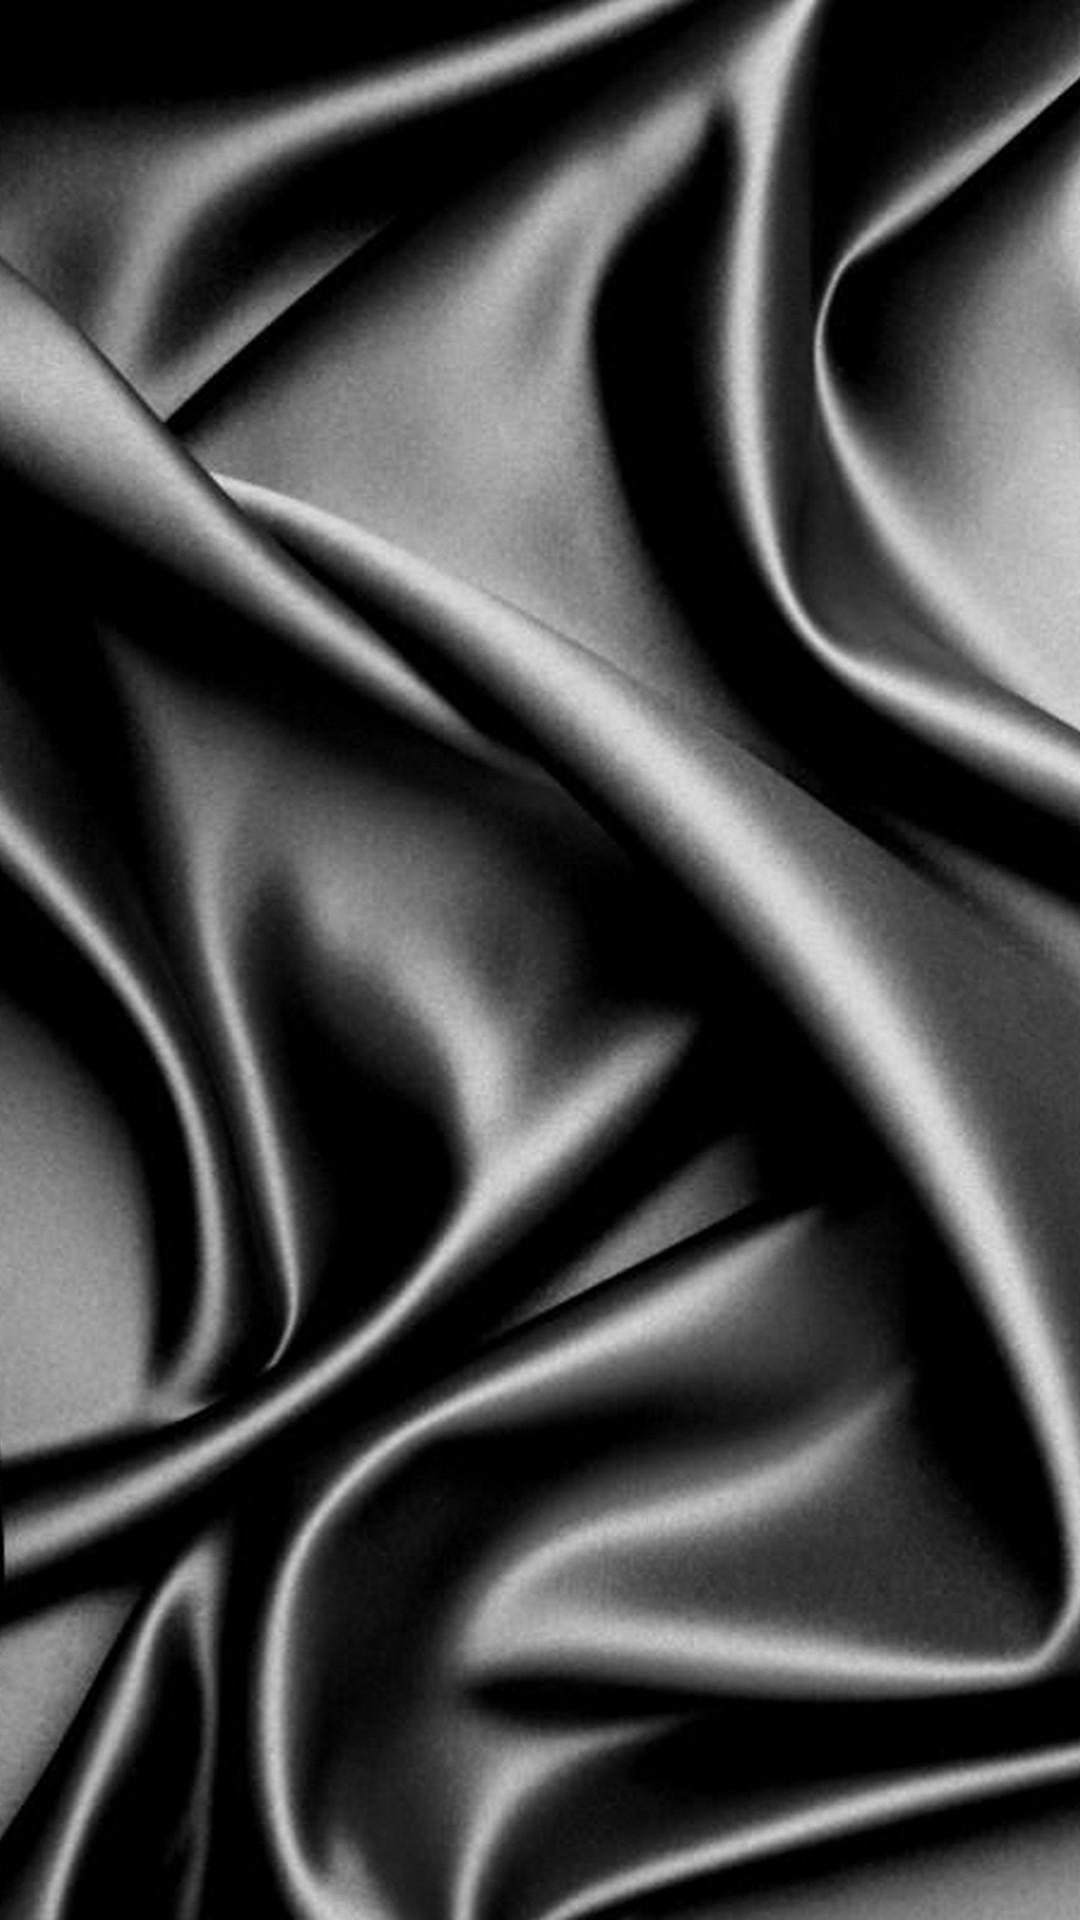 Black Silk Cell Phones Wallpaper with high-resolution 1080x1920 pixel. Download all Mobile Wallpapers and Use them as wallpapers for your iPhone, Tablet, iPad, Android and other mobile devices